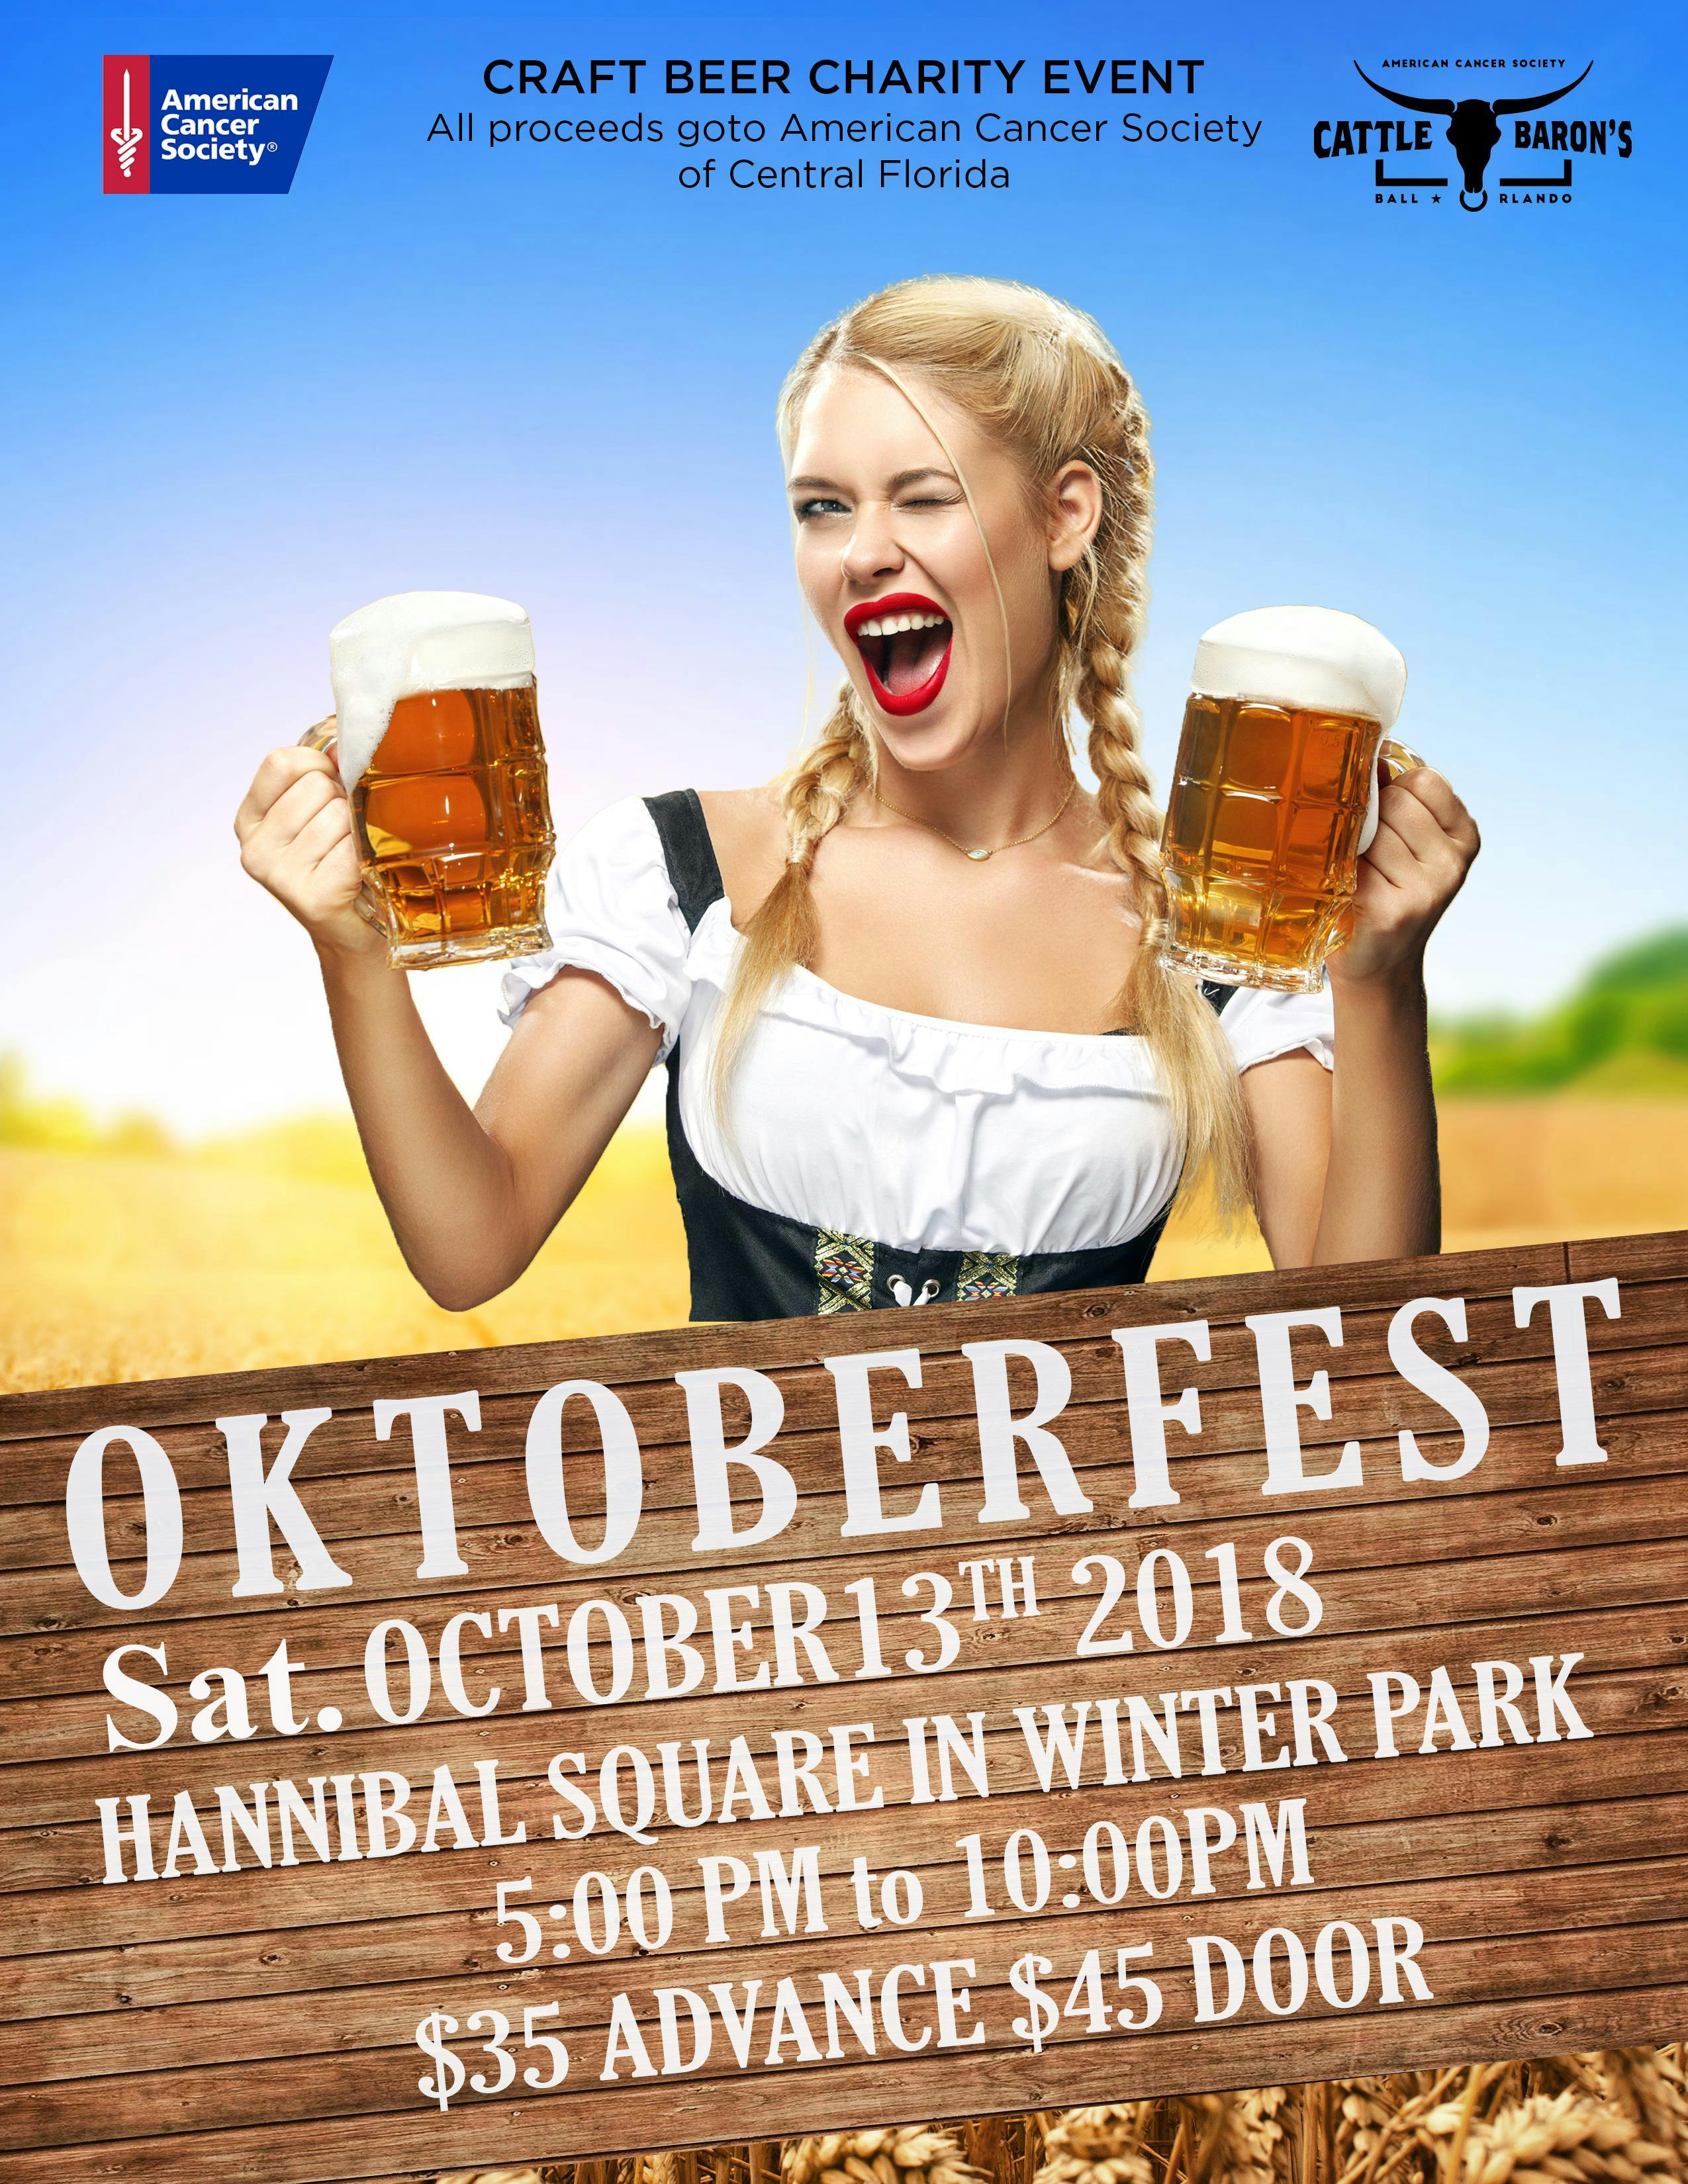 Charity Craft Beer Oktoberfest - American Cancer Society of Central Florida